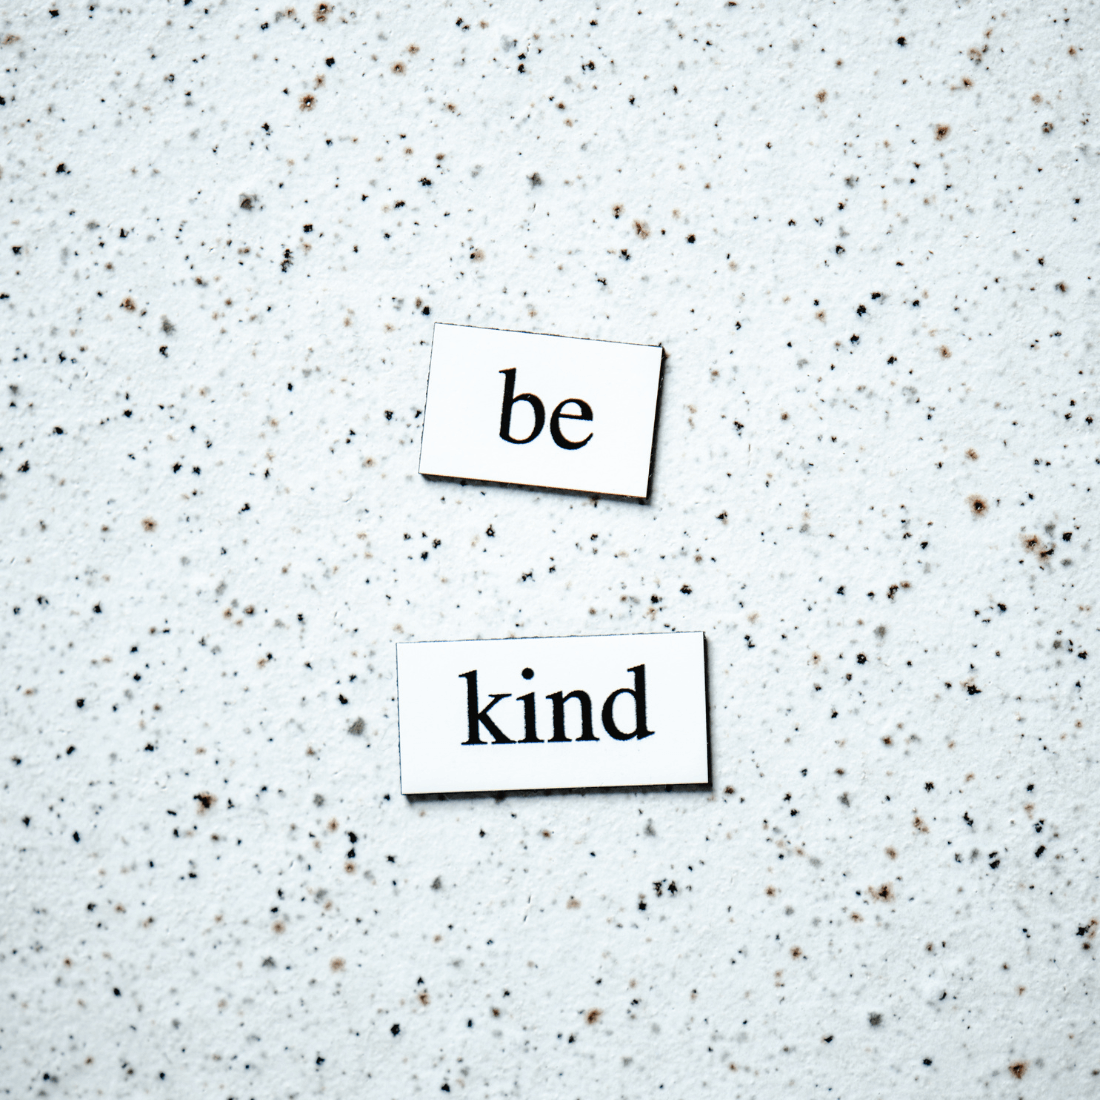 ActiveEquip Blog Be Kind Kindness is Free